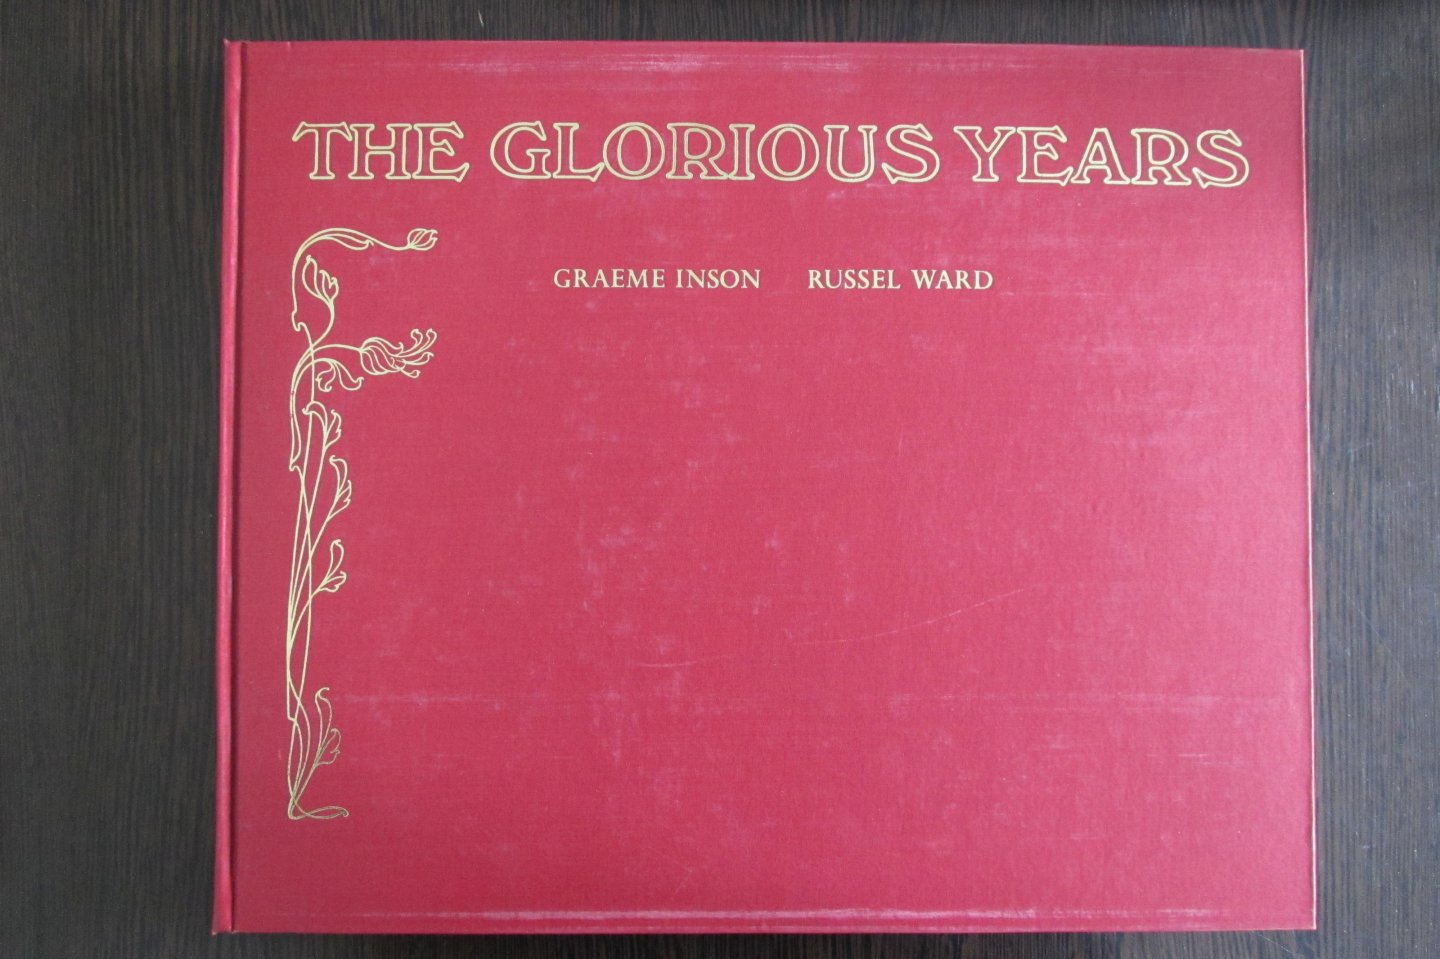 Greame Inson en Russel Ward - The Glorious Years of Australia Fair from the Birth of the Bulletin to Versailles - inclusief bijbehorende LP  - isbn 9780701604204